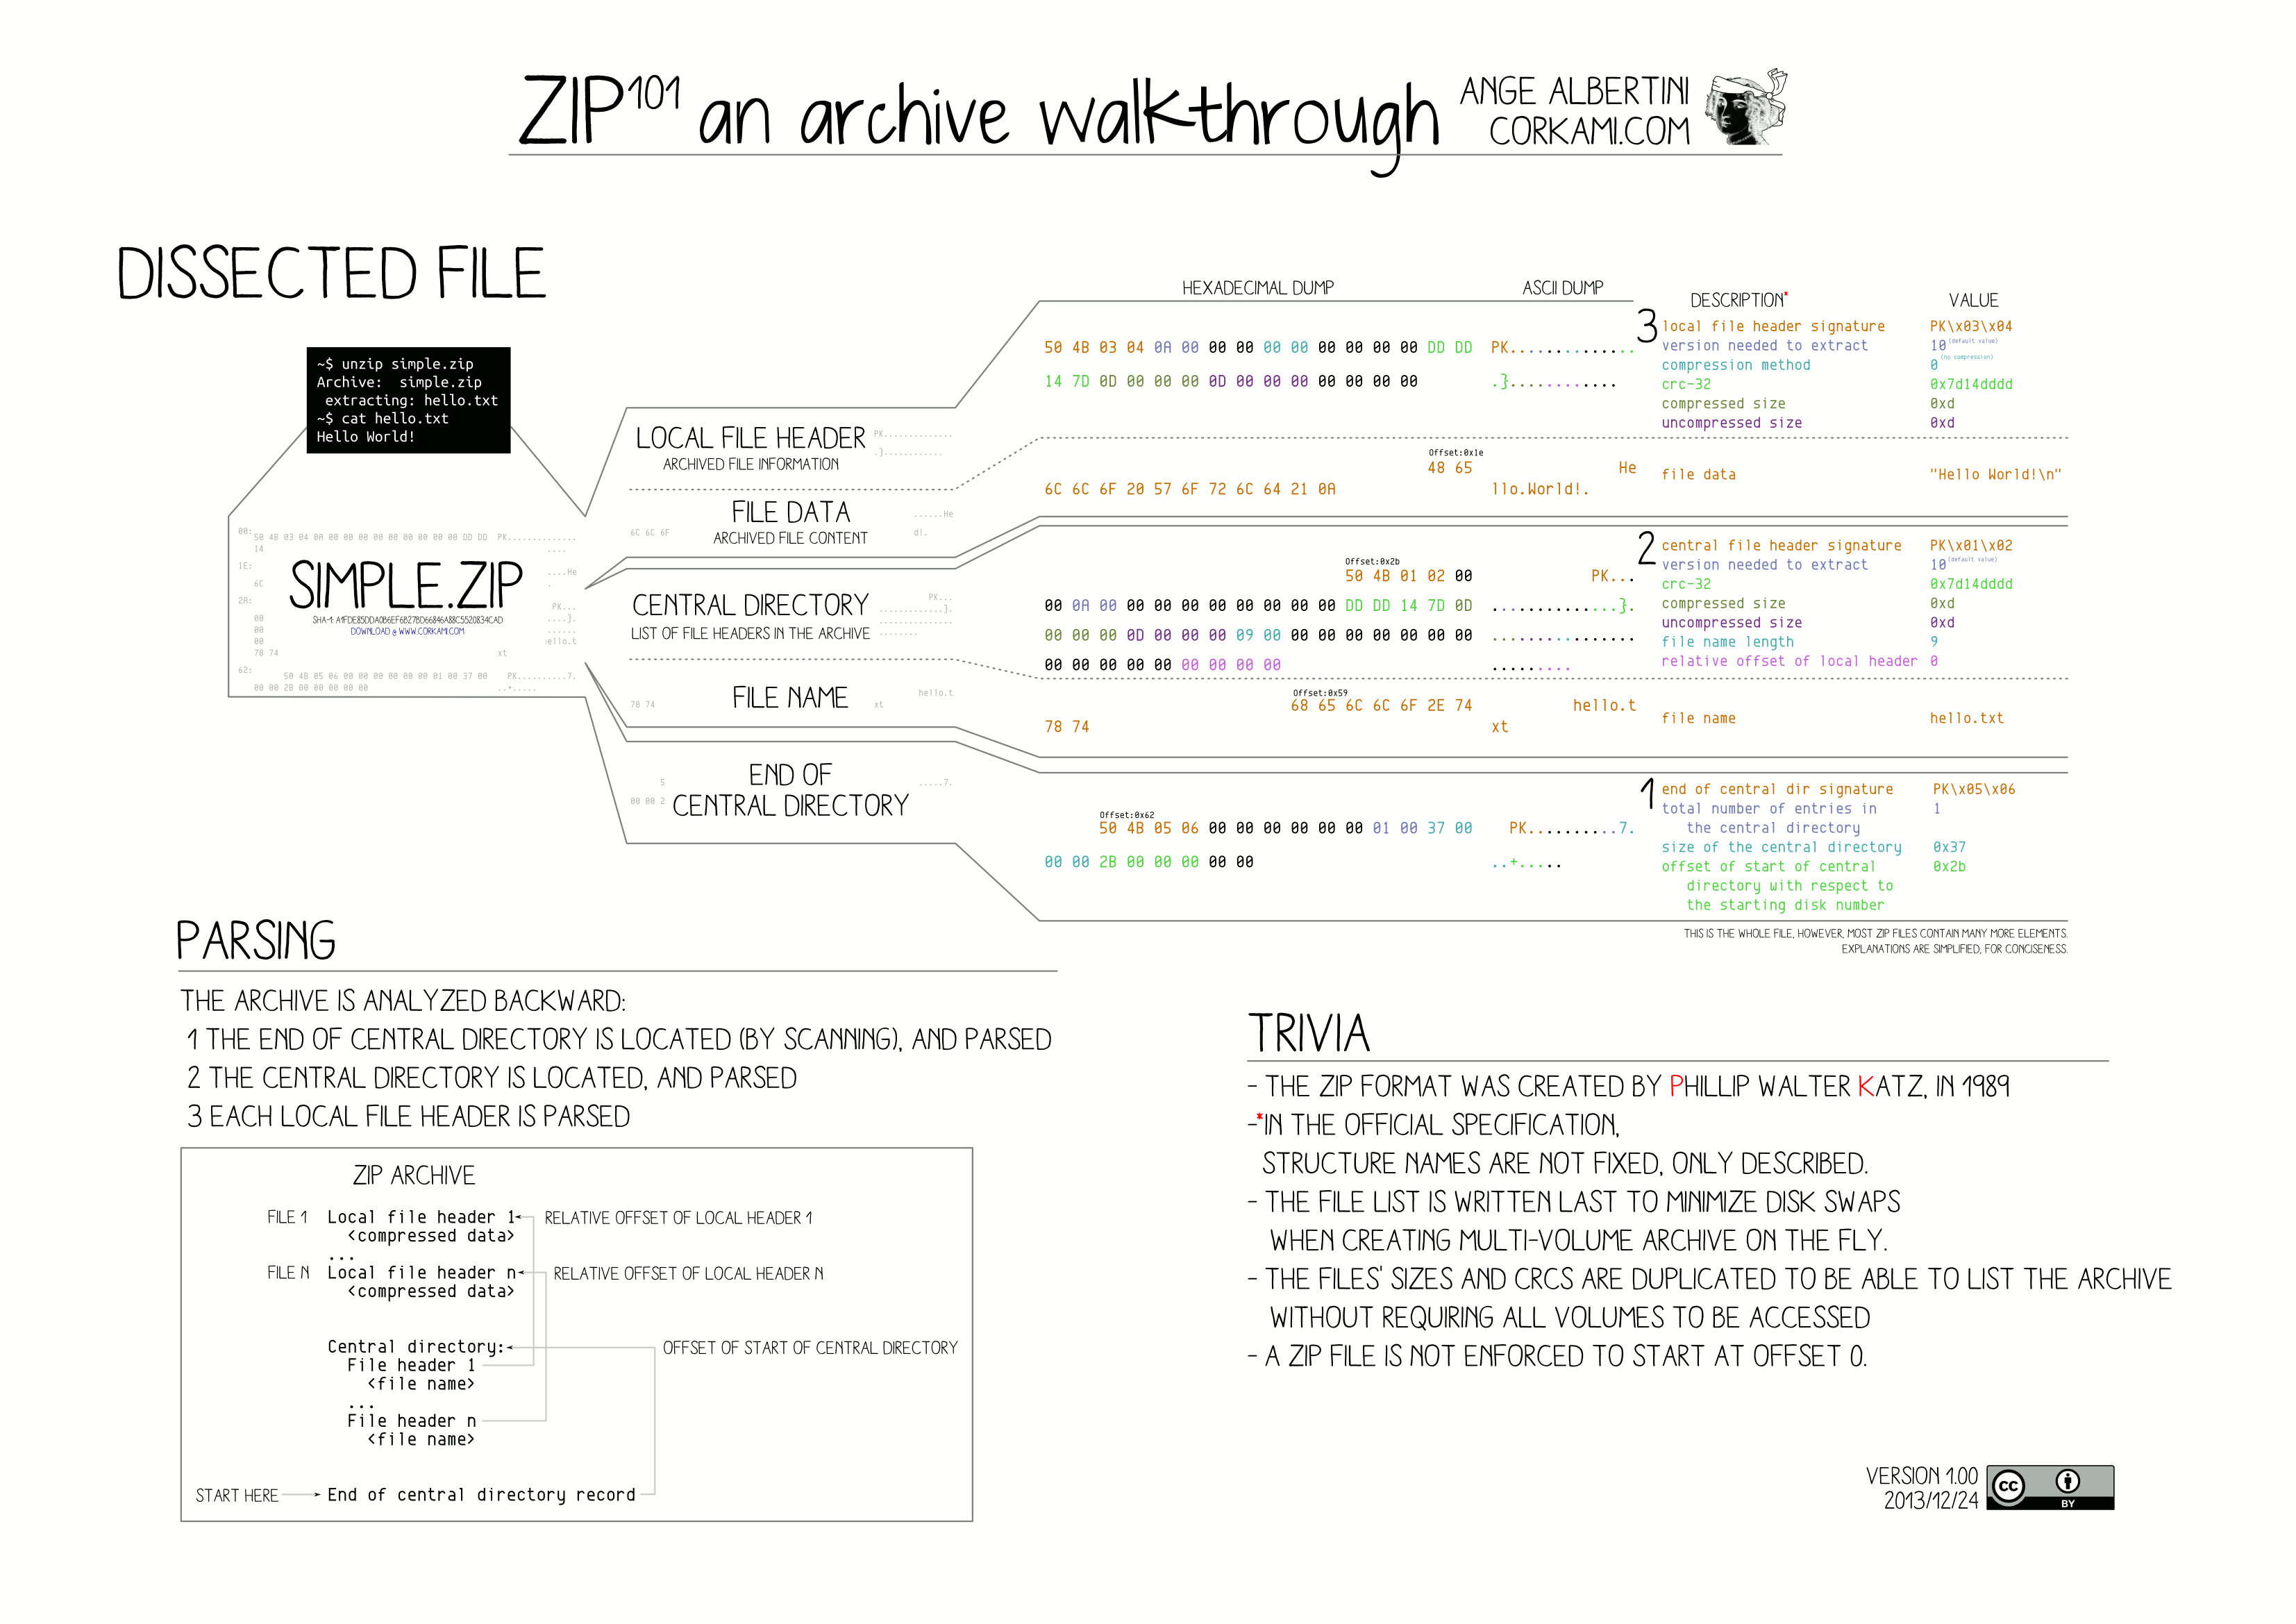 A schema explaining the ZIP format. It is quite complex, but the interesting part is how the parsing is done. The archive is analyzed backwards. 1. the End of the Central Directory is located (by scanning) and parsed. 2. the Central Directory is located, and parsed. 3. each Local File Header is parsed.